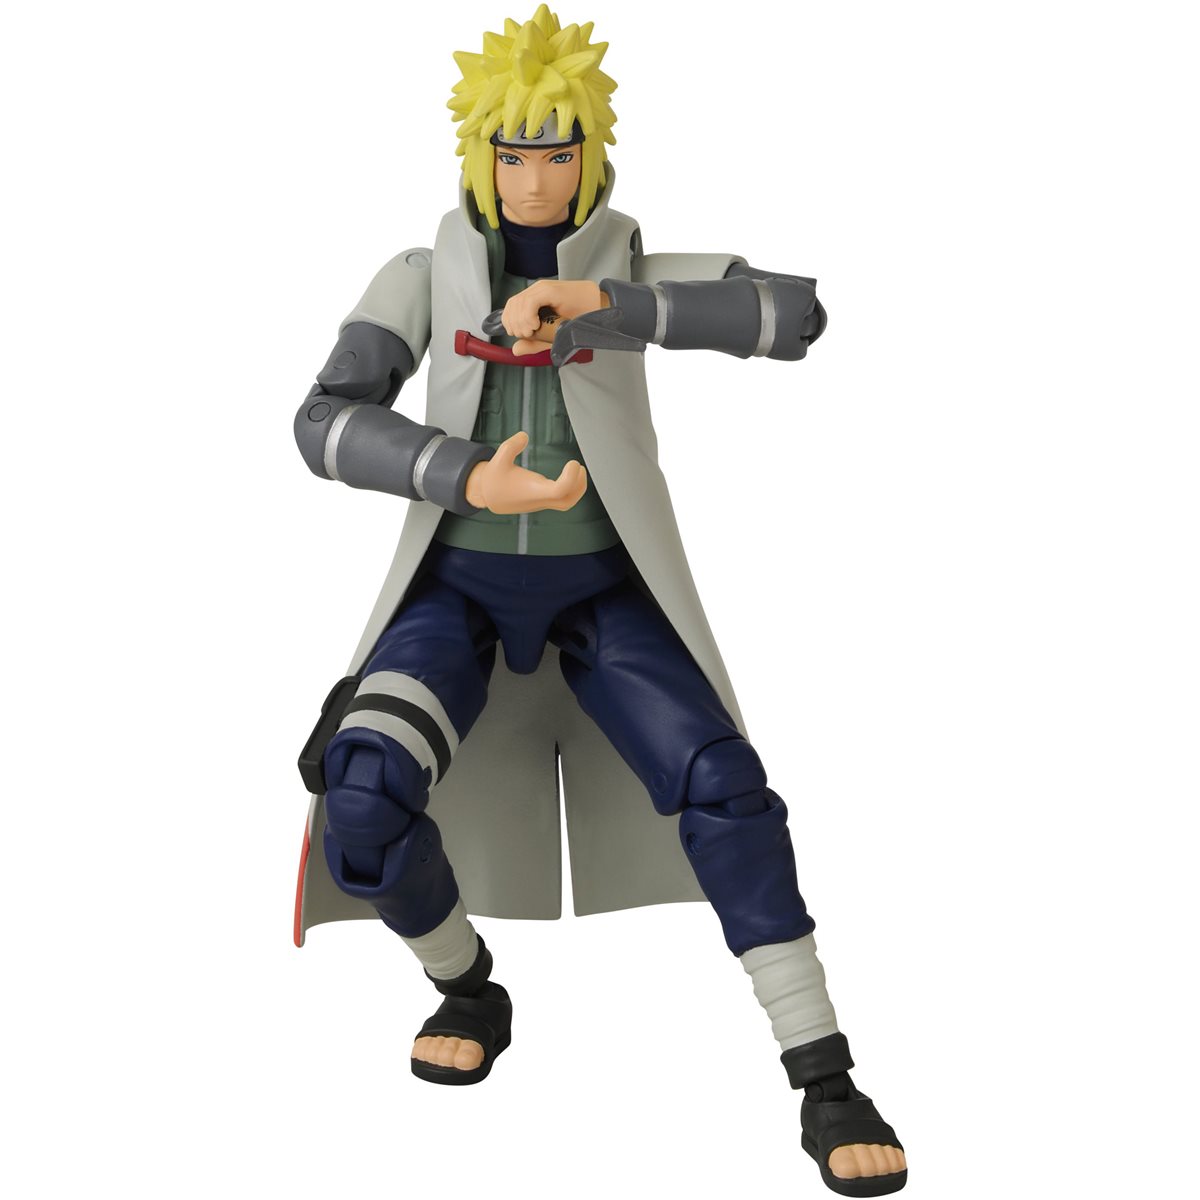 naruto and minato  -as if I care about your opinion